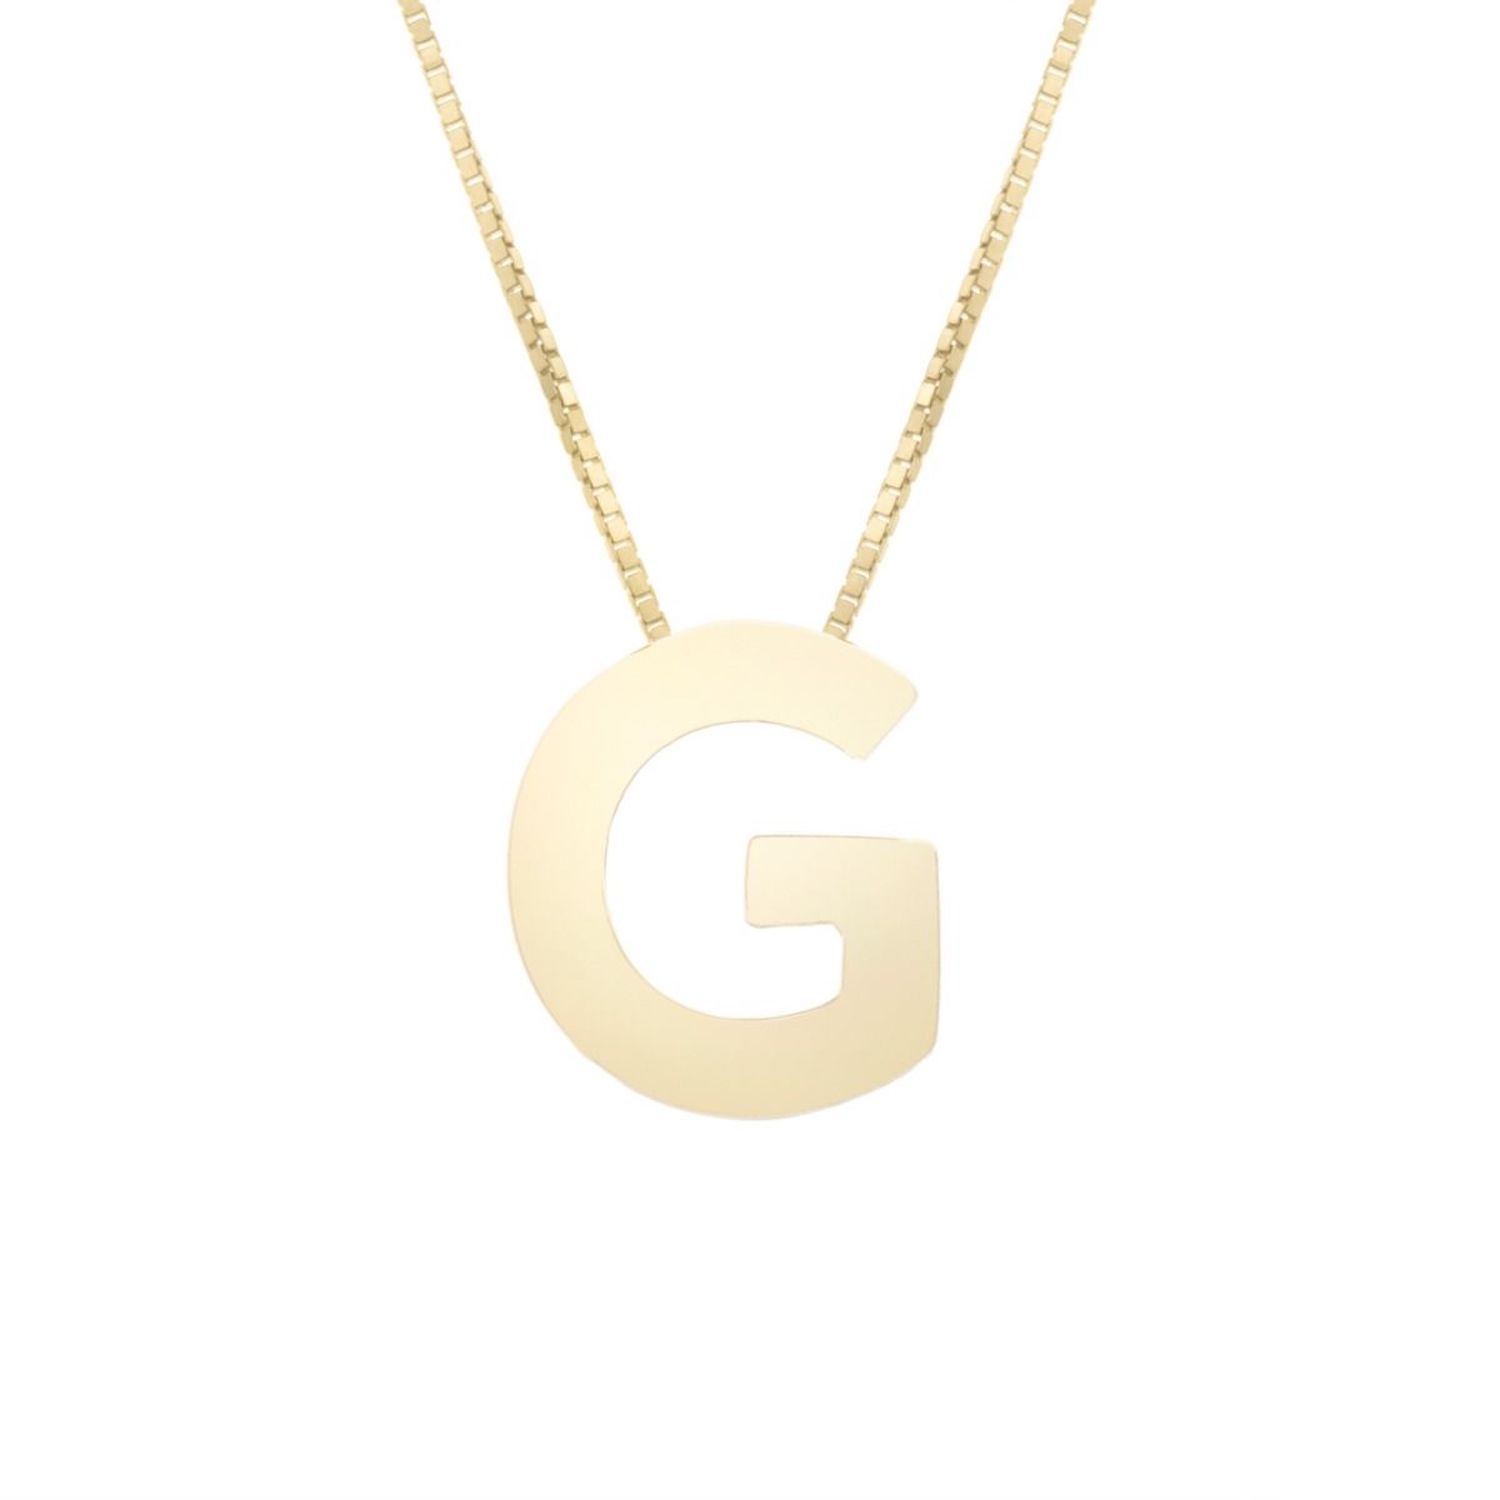 14K Yellow Gold Block Letter Initial Pendant Box Chain Necklace 16"-18" - G